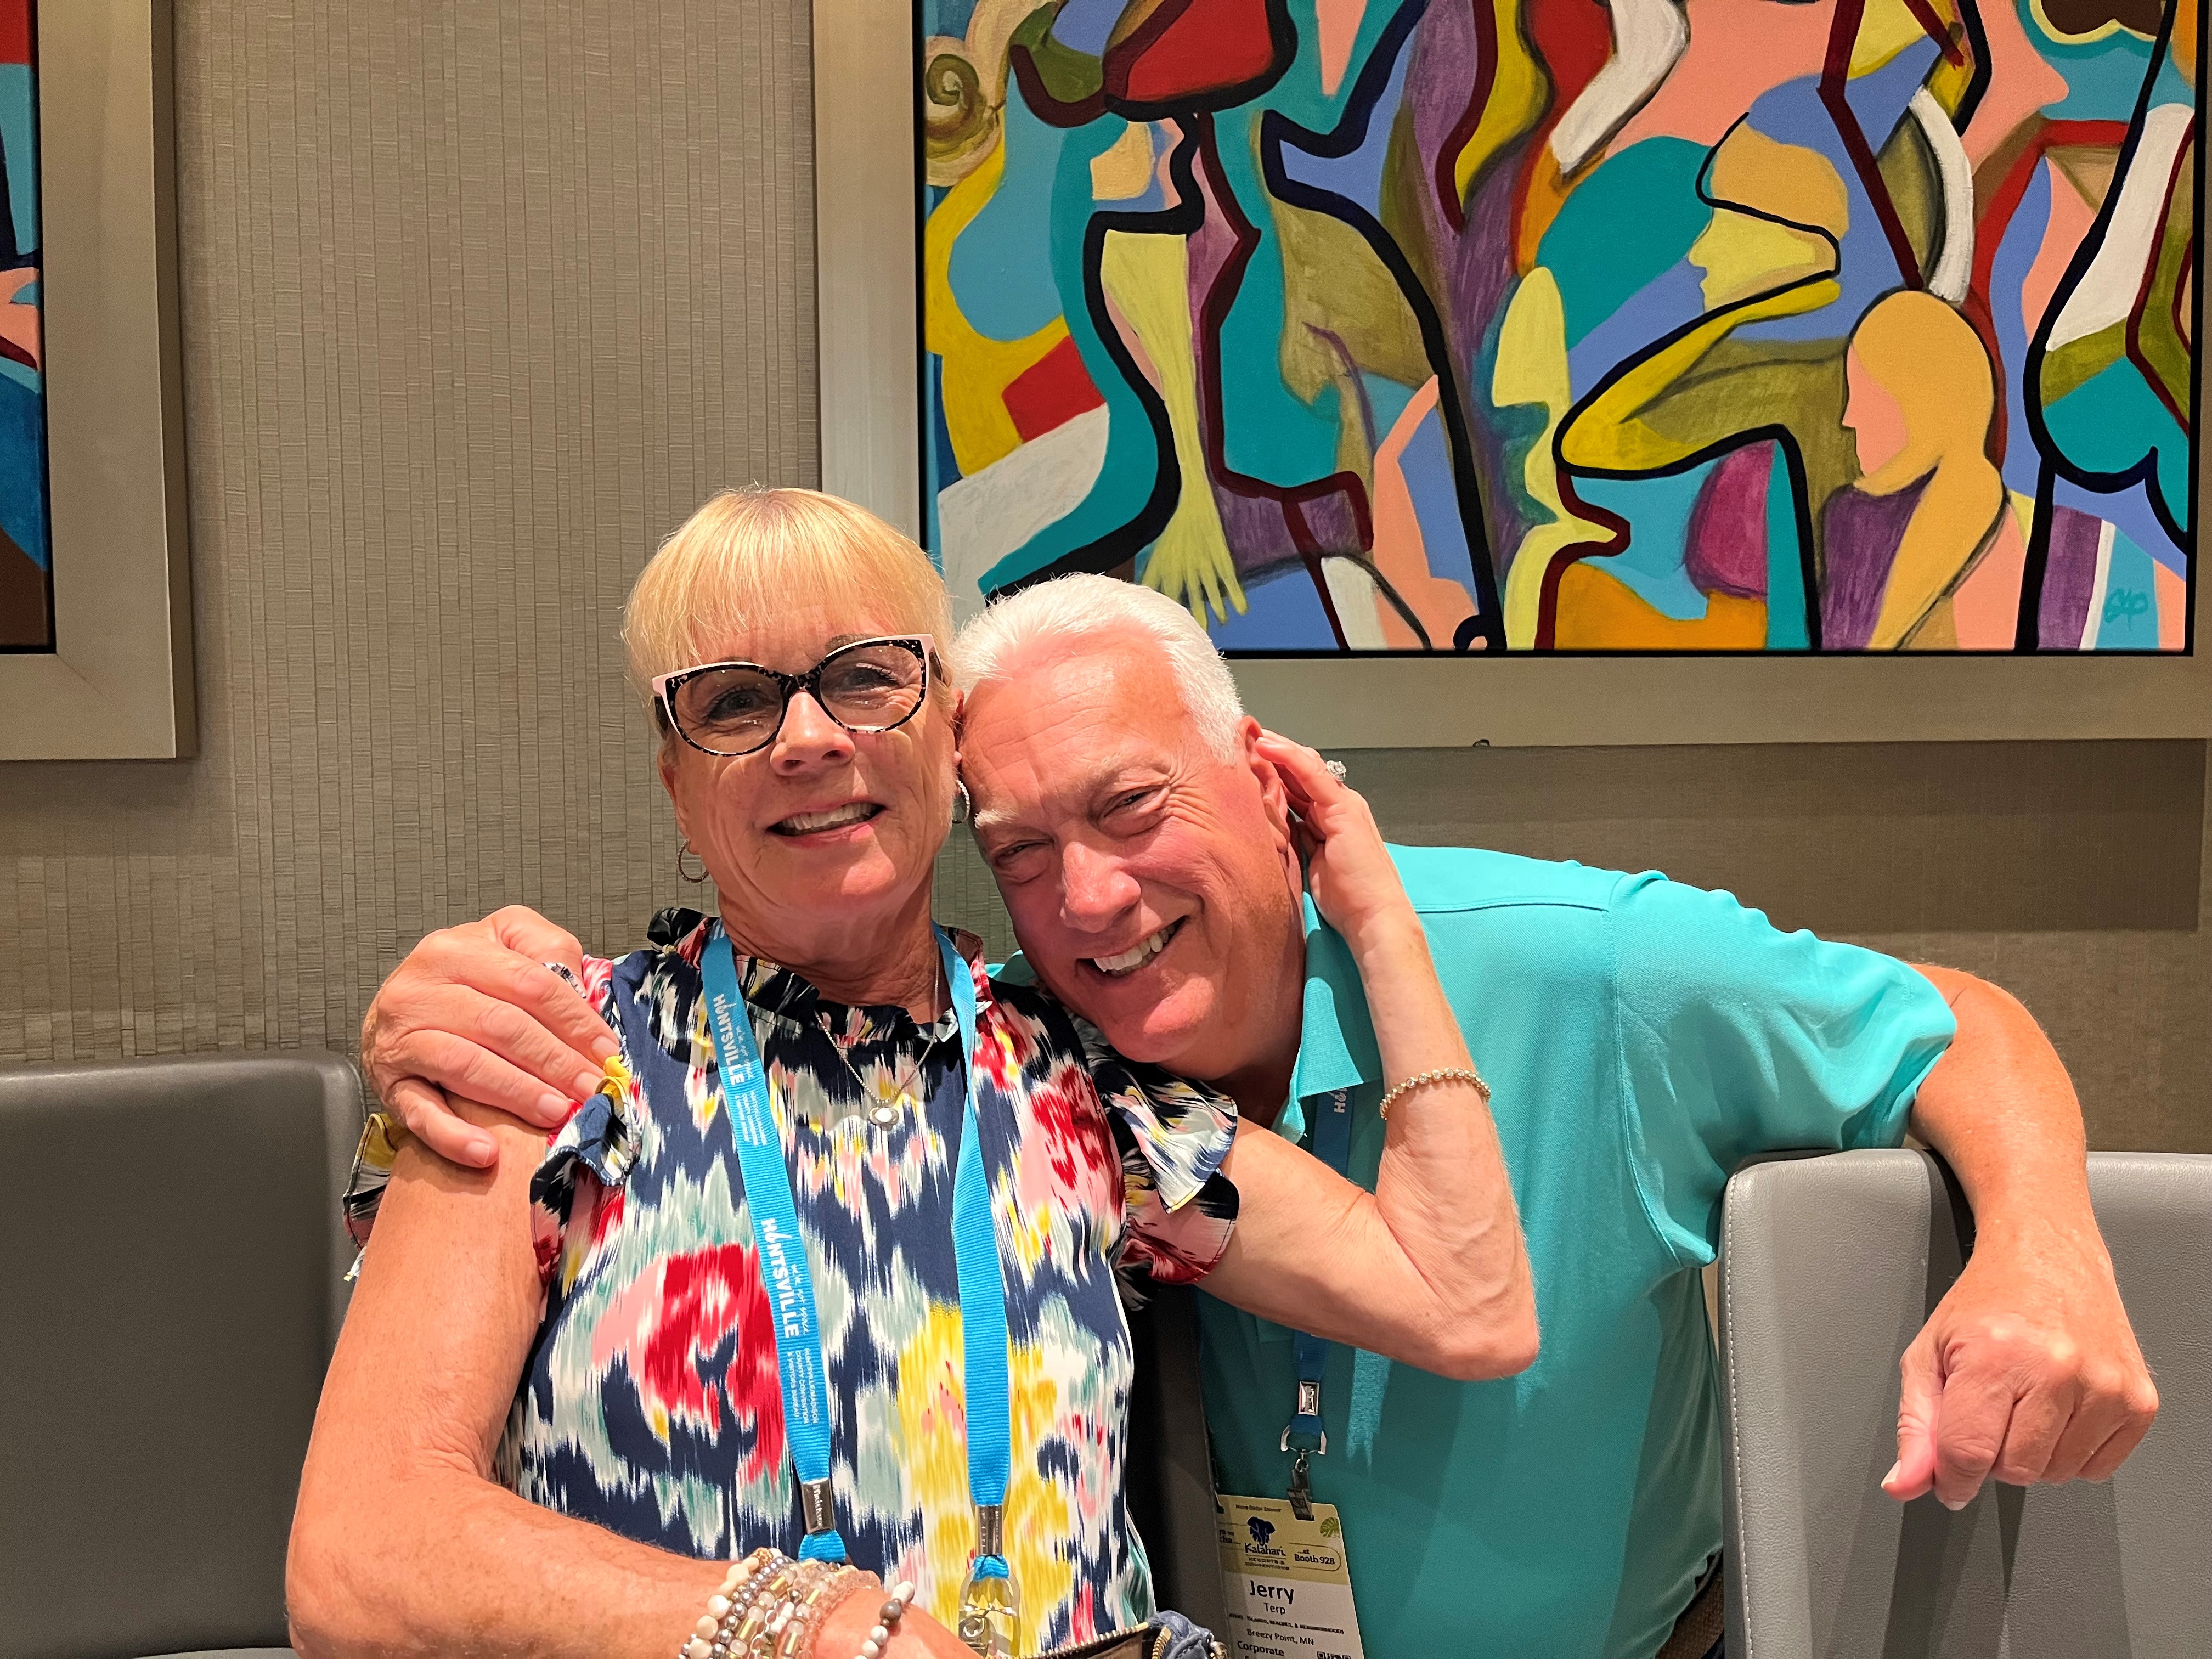 Kathy Hedlund from HelmsBriscoe had a moment to rekindle a friendship with Jerry Terp at CONNECT Marketplace in Minneapolis, MN